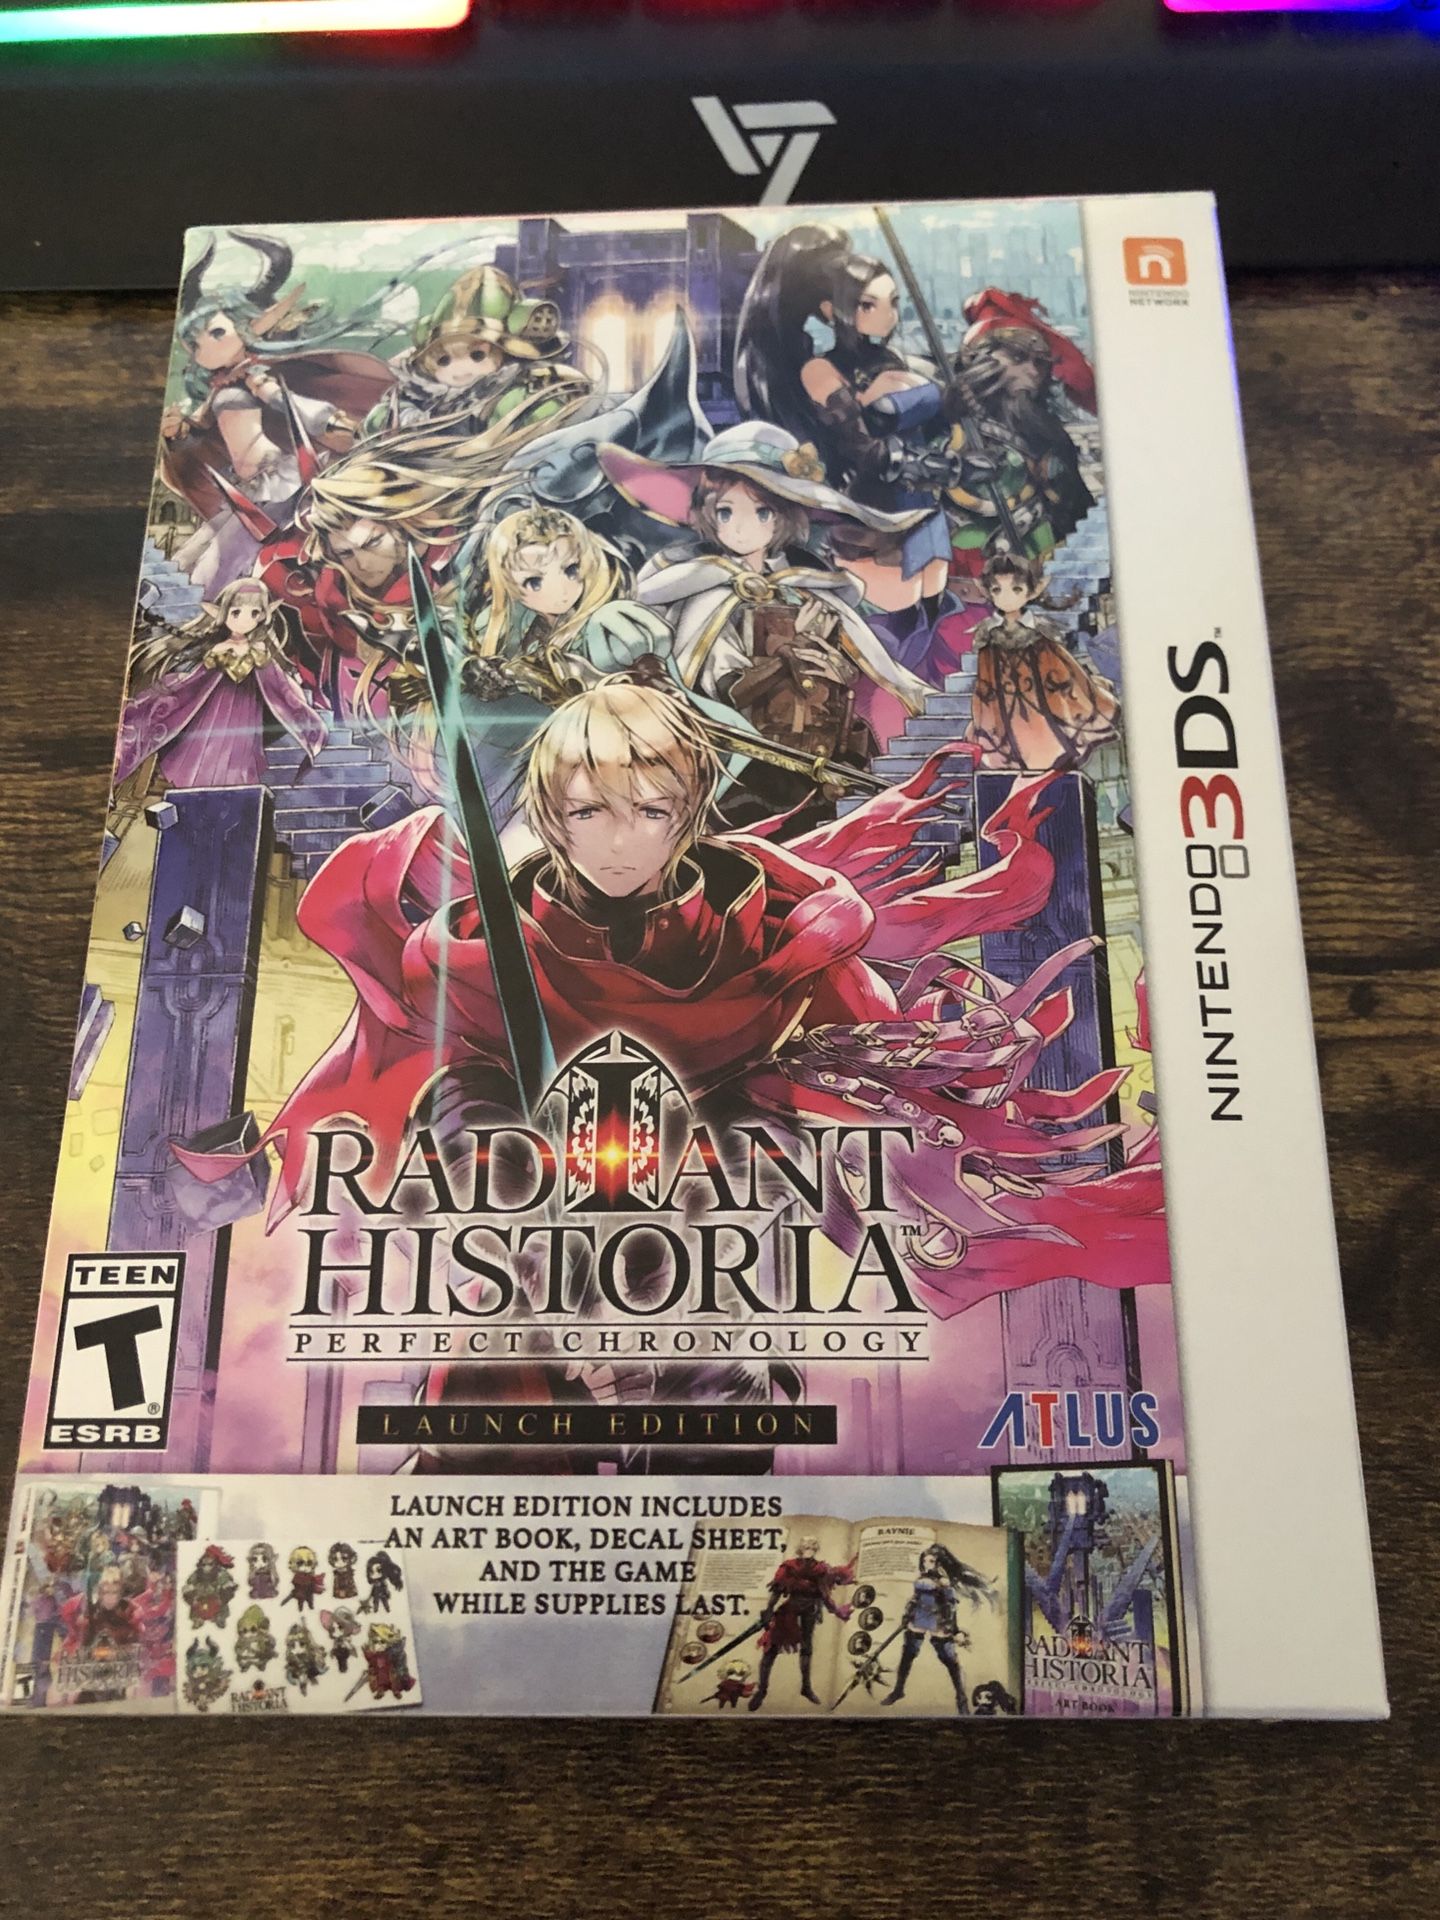 Radiant Historia. 3DS XL. Launch Edition.